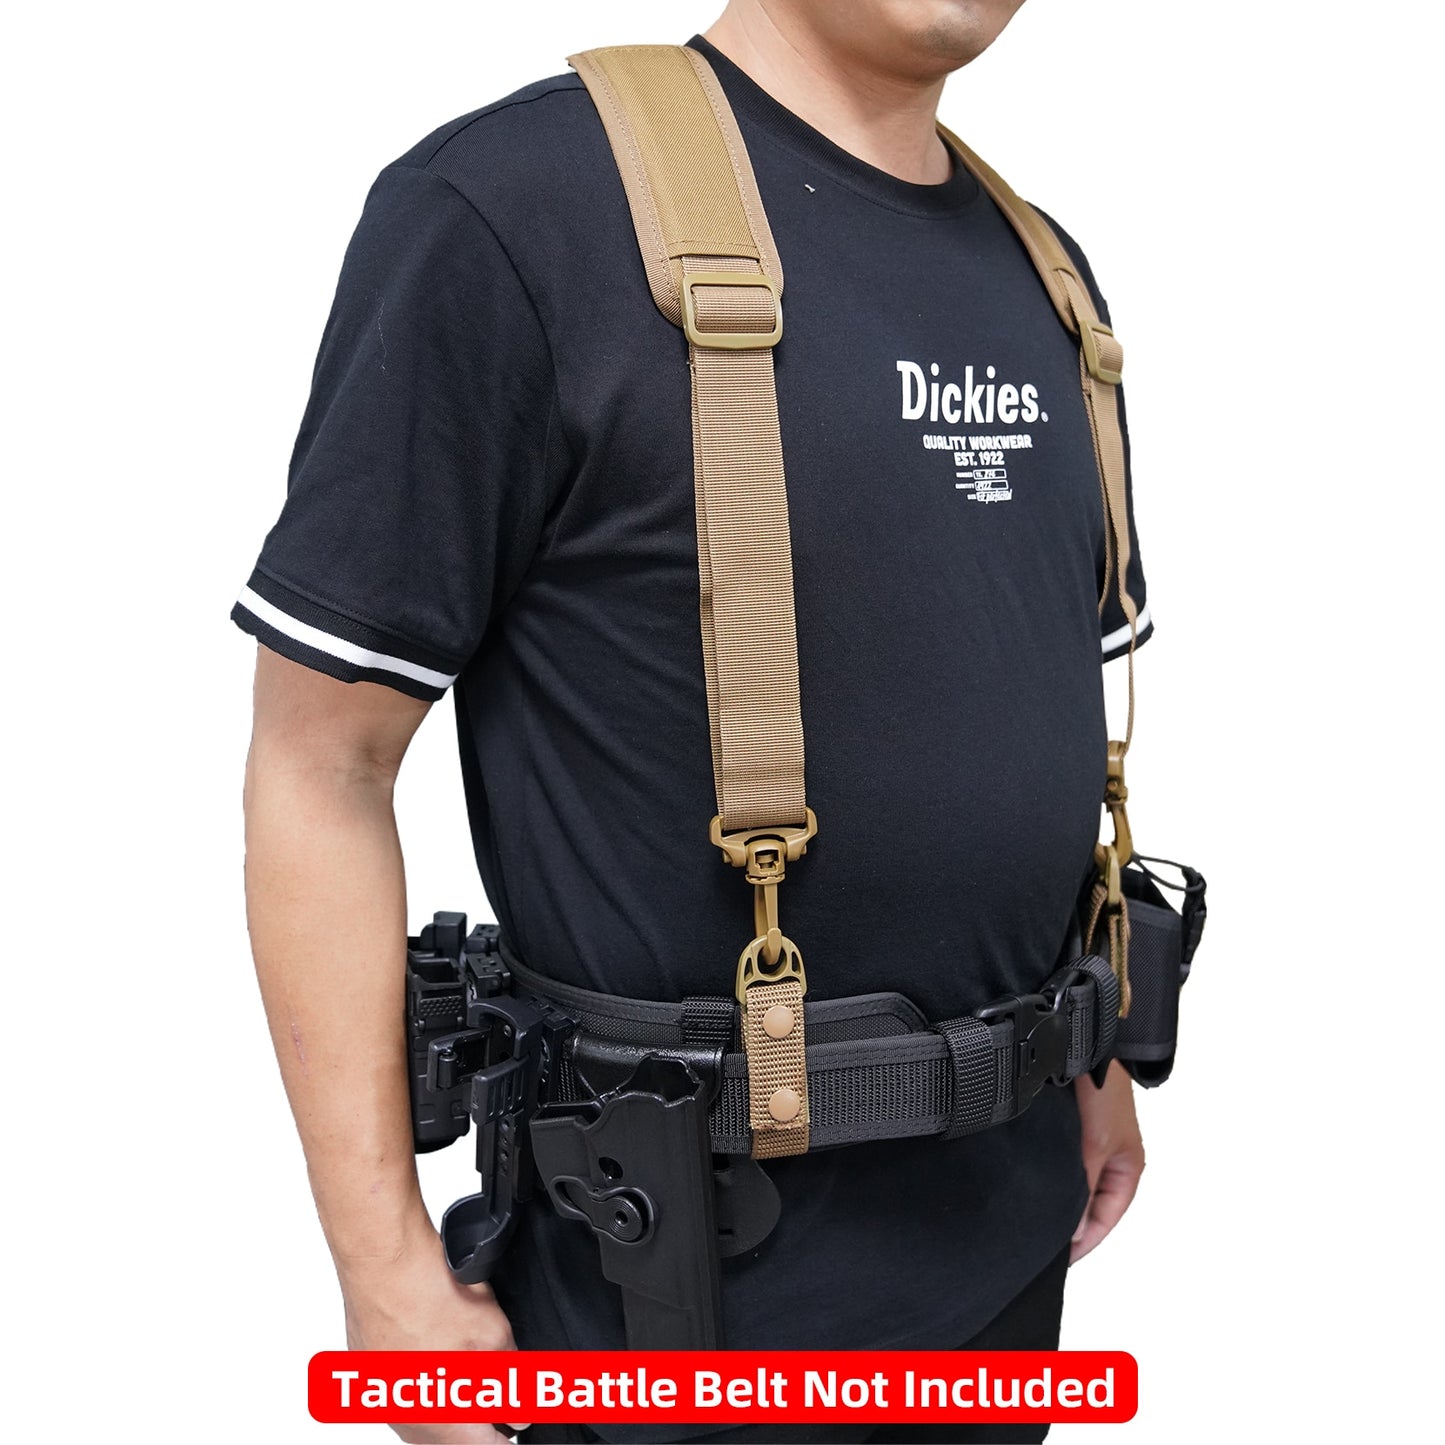 Melo Tough Tactical Harness Tactical Suspenders 1.5 inch Police Suspenders for Duty Belt